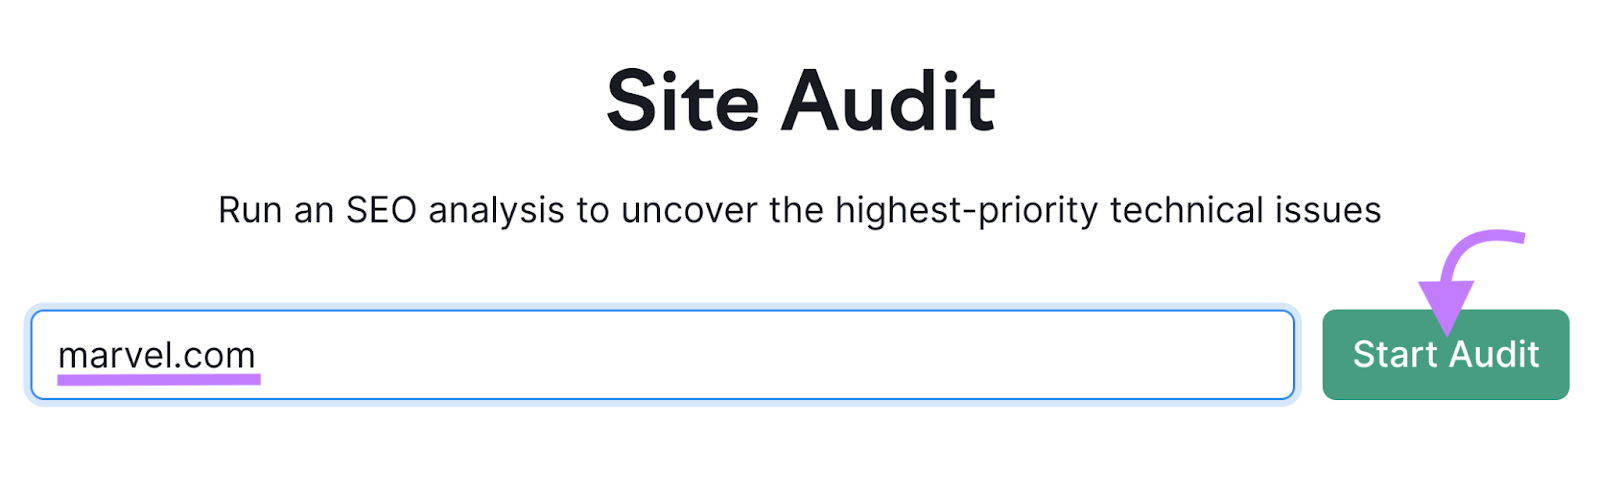 search for "marvel.com" in Site Audit tool